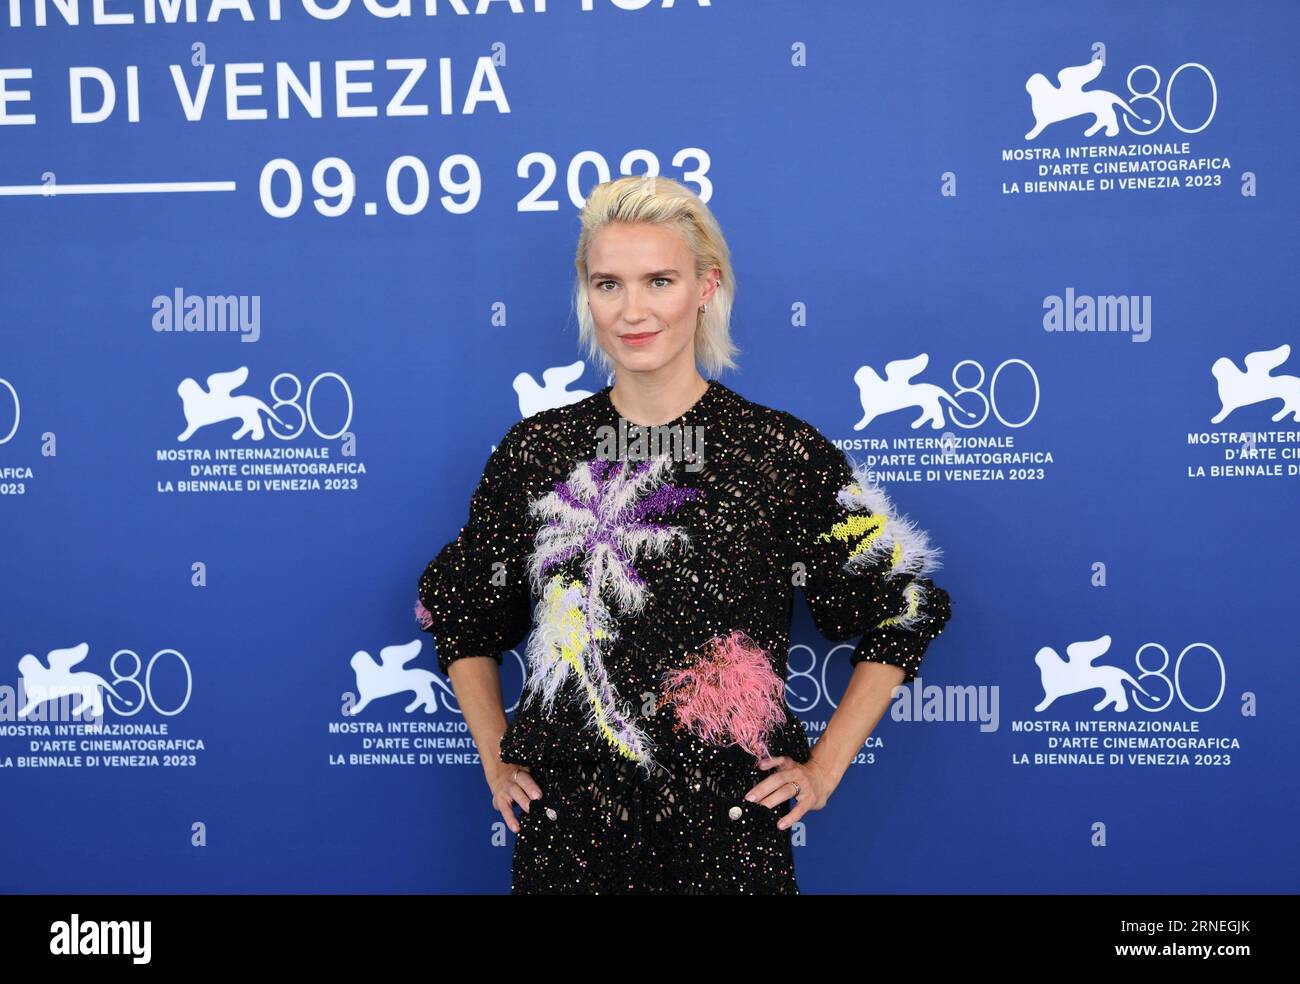 Venice, Italy. 1st Sep, 2023. Actress Amanda Collin attends a photocall for the film 'Bastarden (The Promised Land)' during the 80th Venice International Film Festival in Venice, Italy, Sept. 1, 2023. The film will compete for the prestigious Golden Lion prize. Credit: Jin Mamengni/Xinhua/Alamy Live News Stock Photo